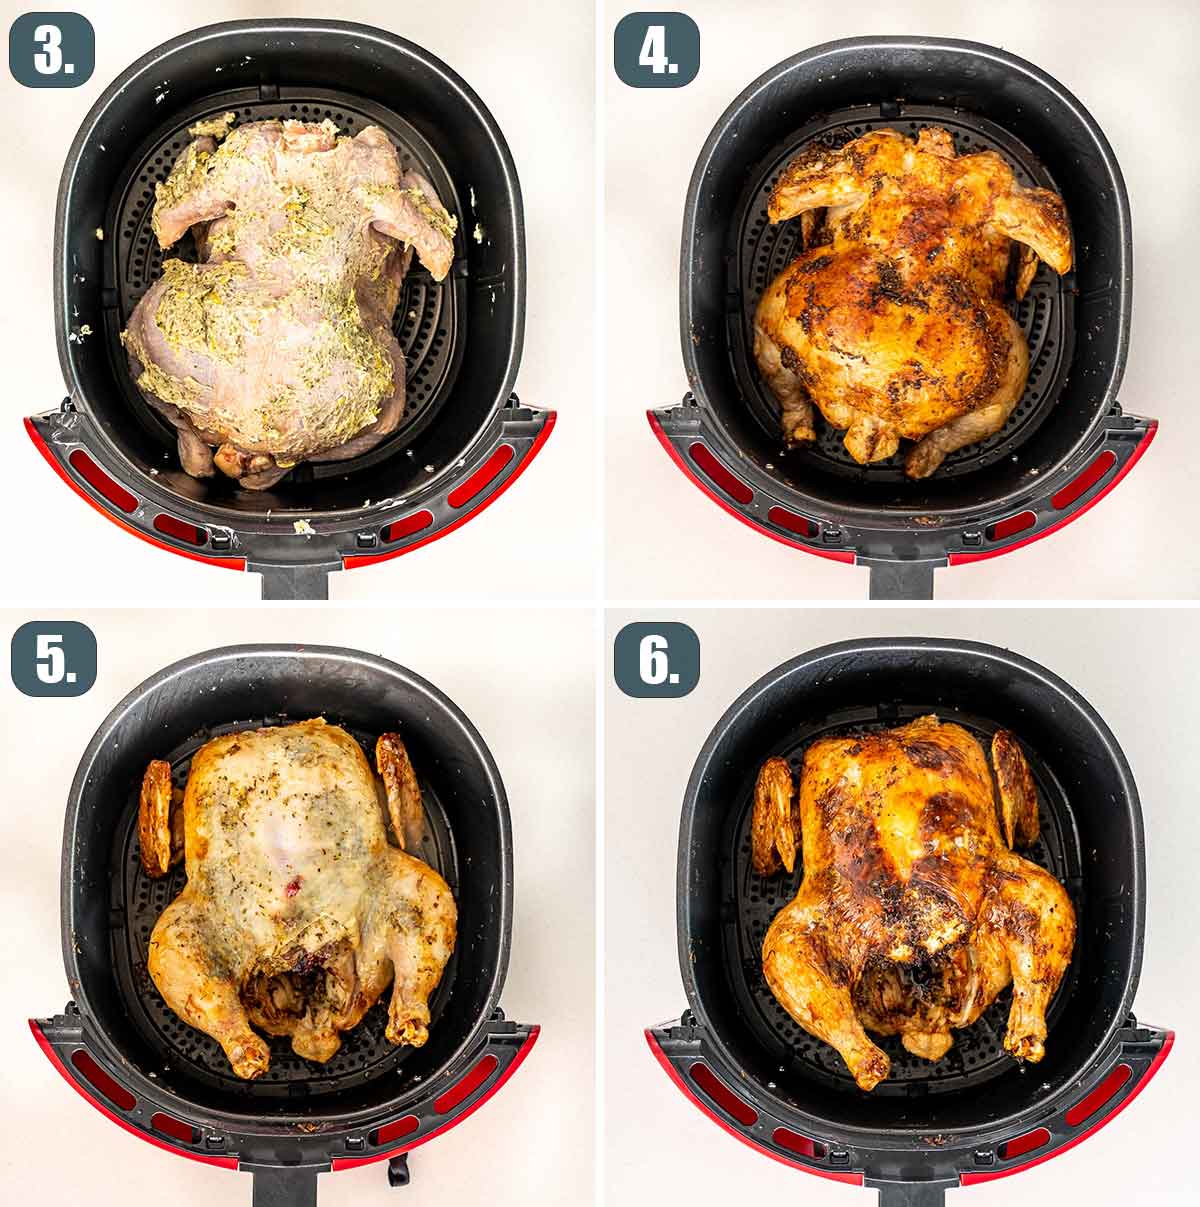 process shots showing how to roast a chicken in an air fryer.